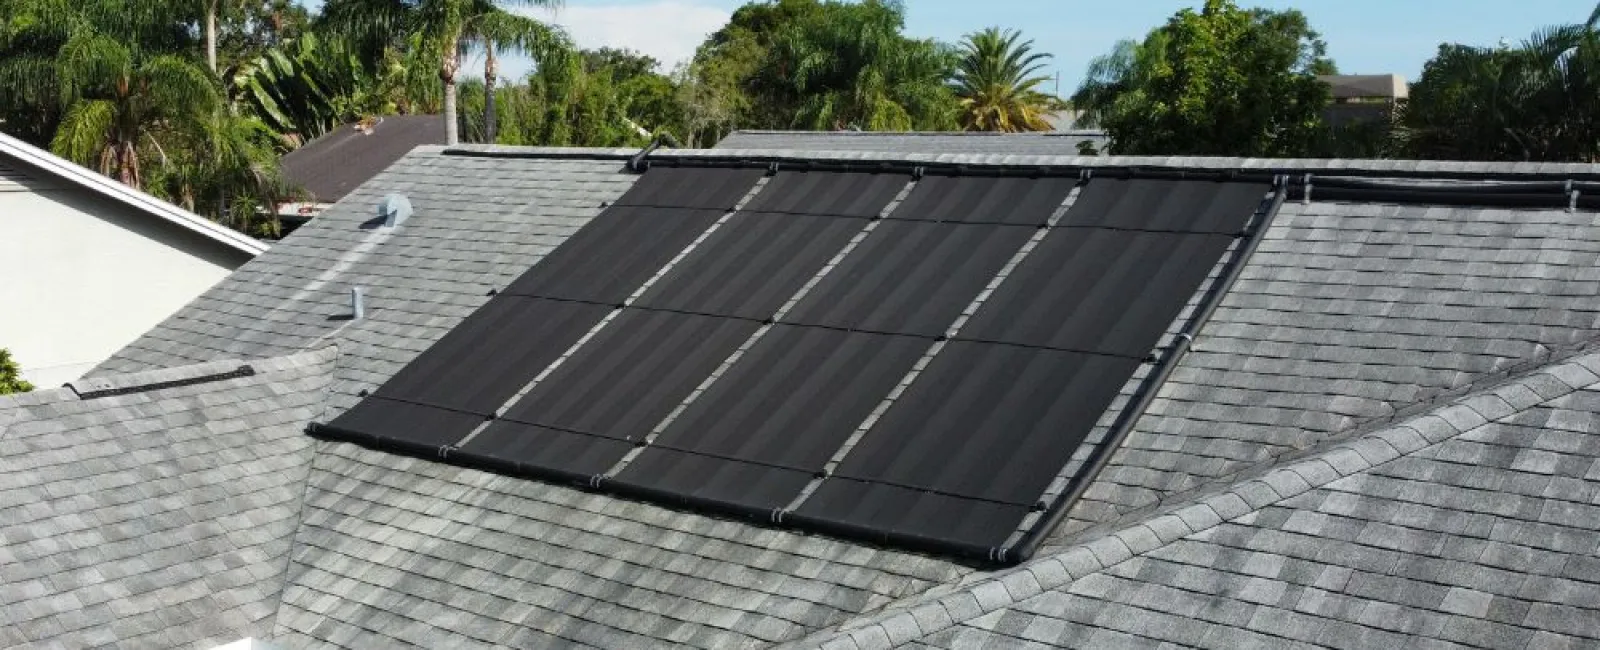 The Benefits of Having Solar Panels Installed on Your Roof